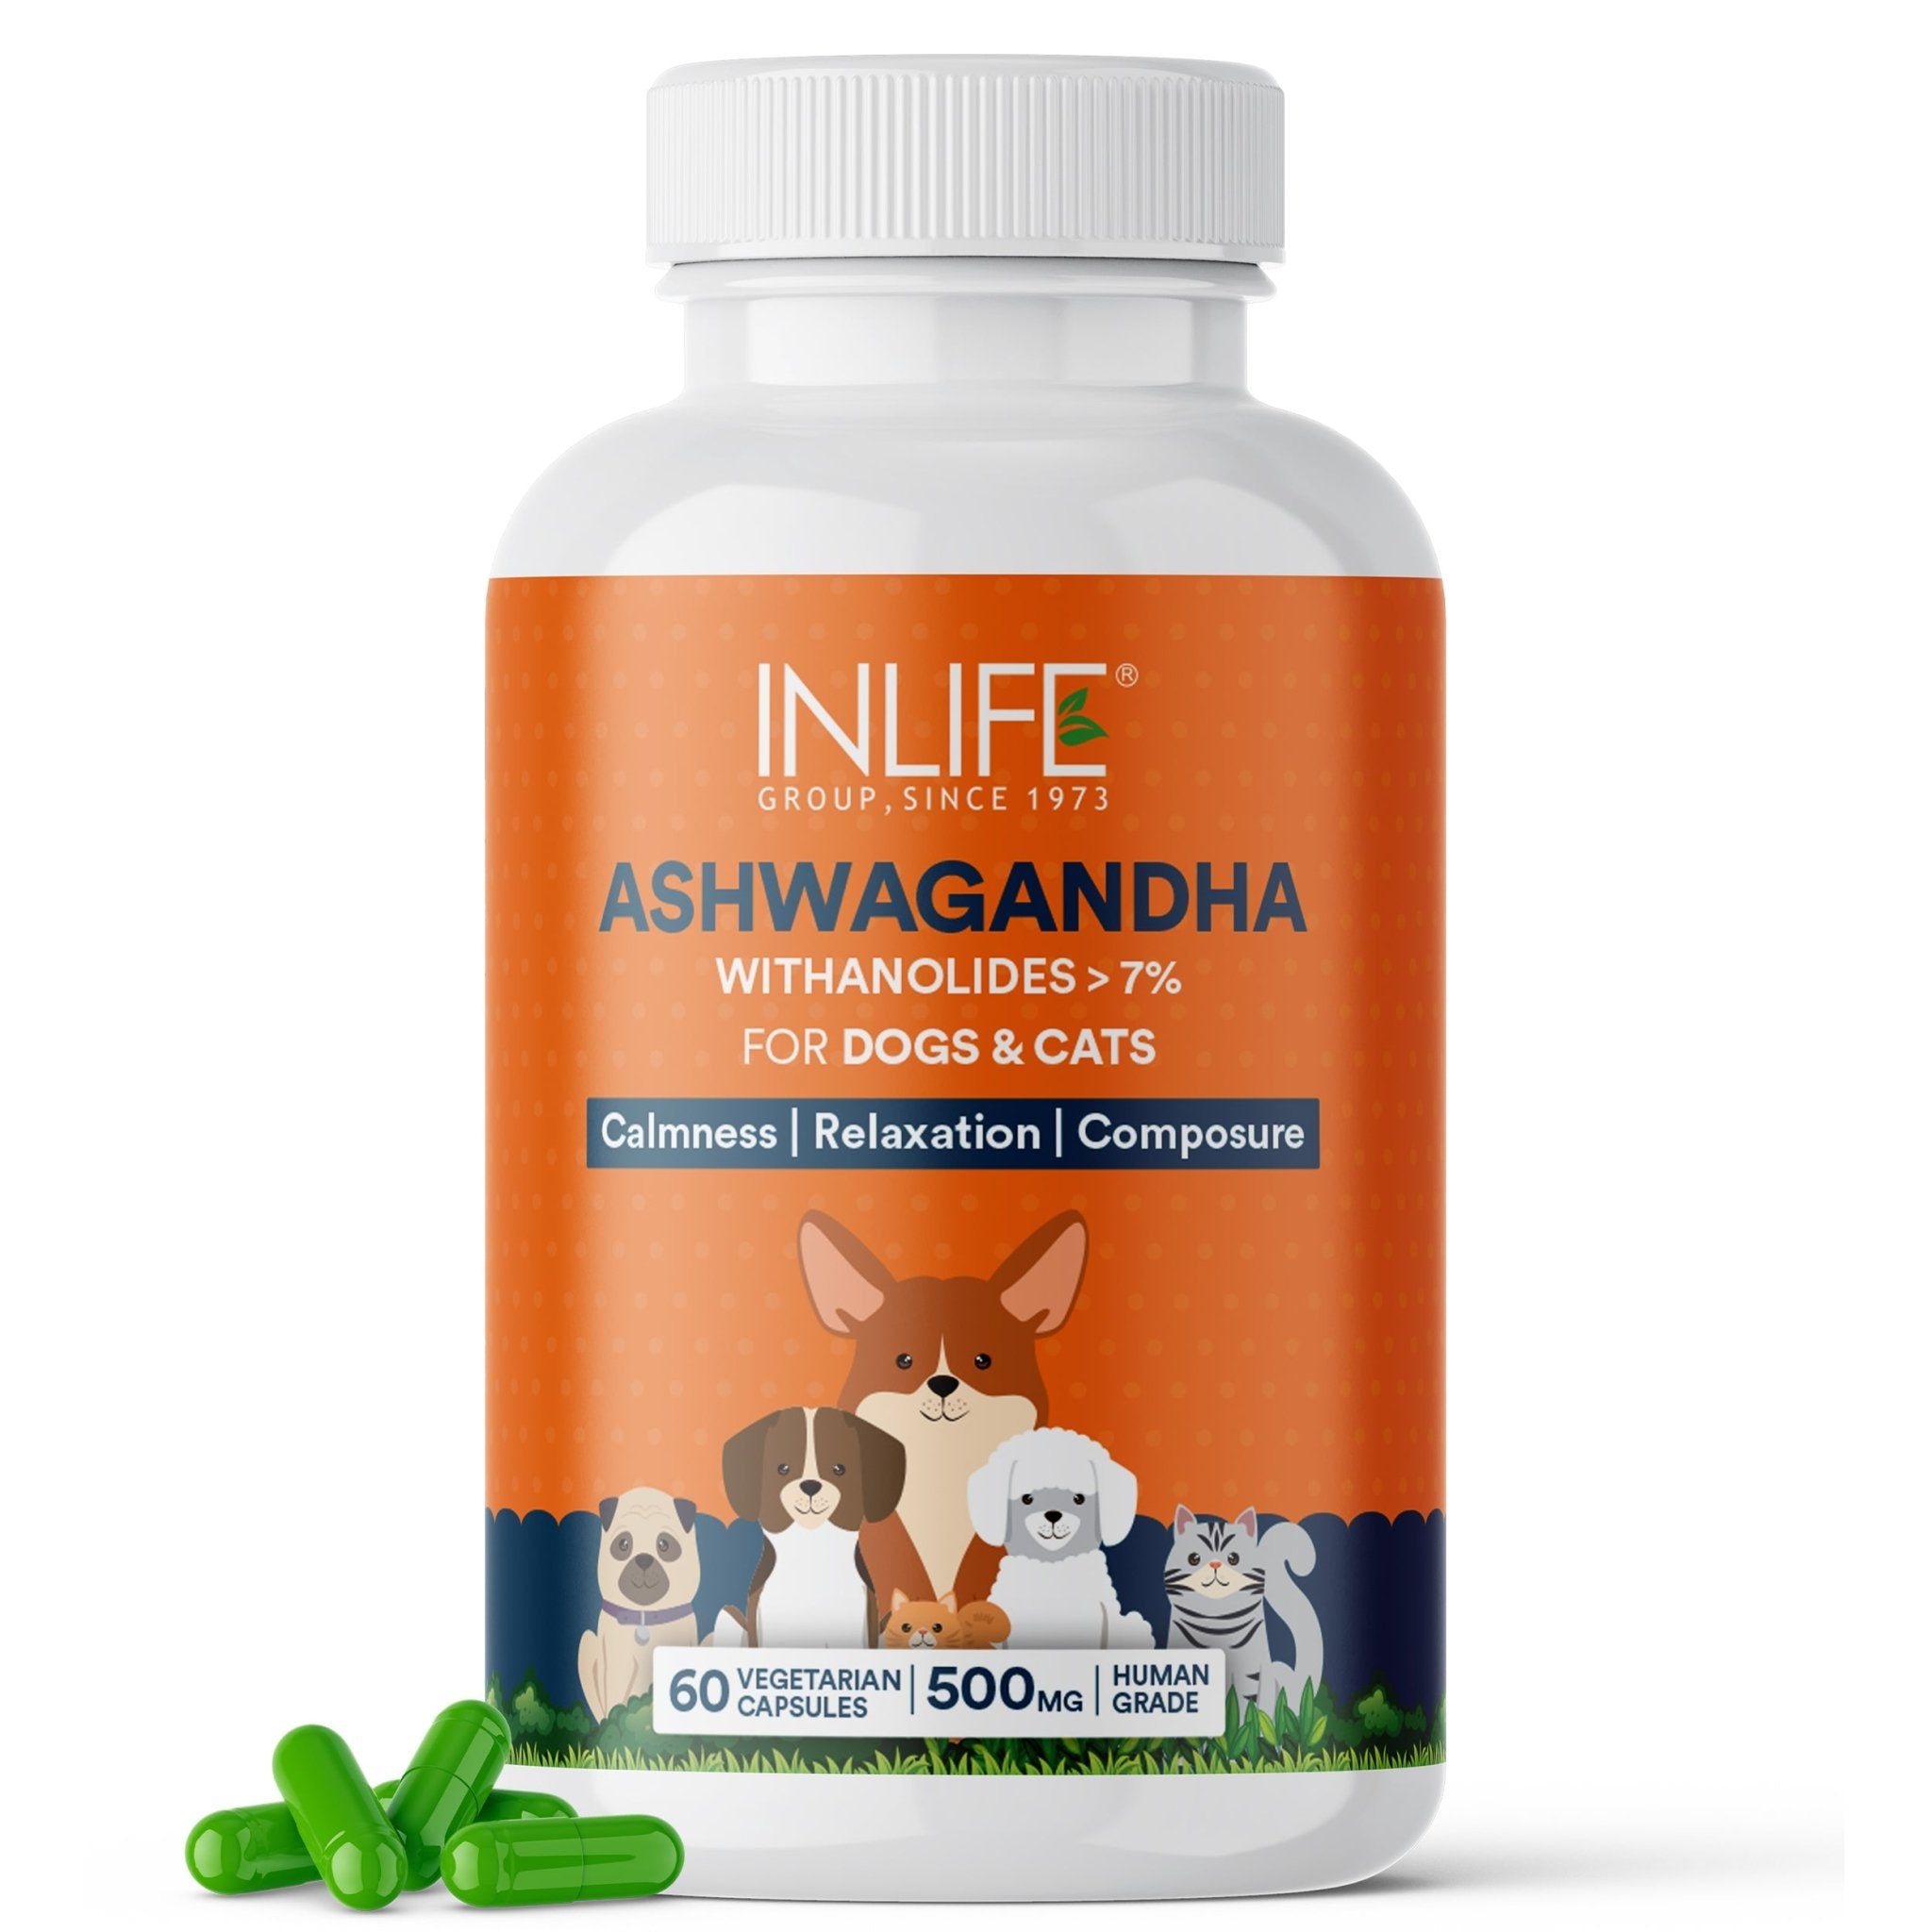 INLIFE Ashwagandha for Pets, Dogs & Cats | Relaxation , Calmness | 500mg | 60 Vegetarian Capsules - Inlife Pharma Private Limited